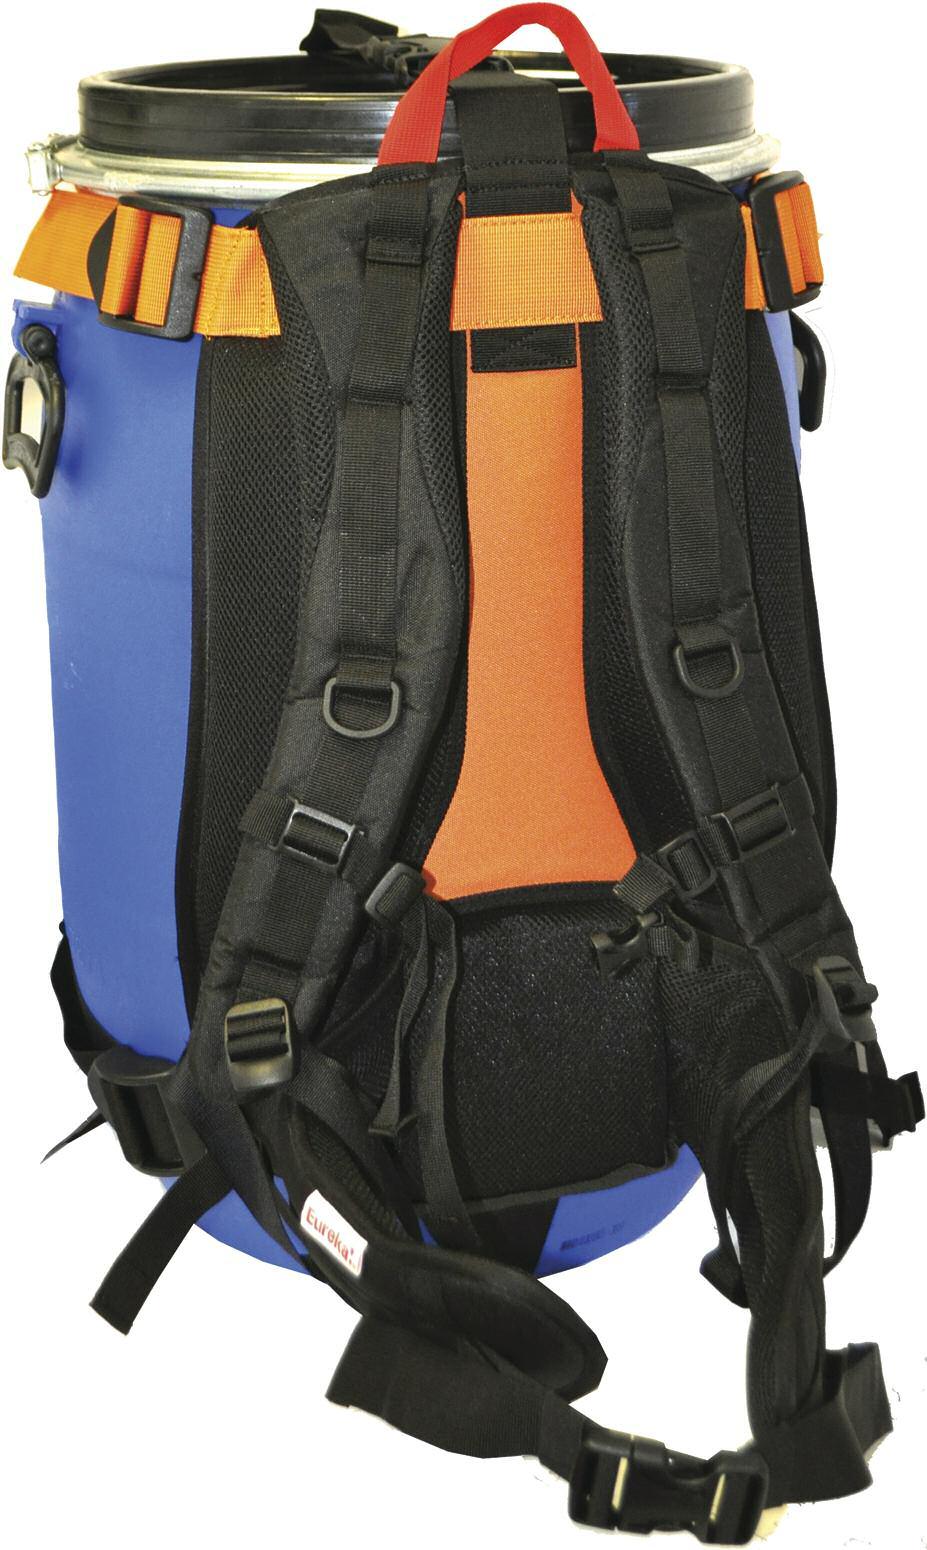 7kg Stormshield Barrel Harness - Universal A web grid secures the barrel to the harness with adjustments to fit all barrel sizes.